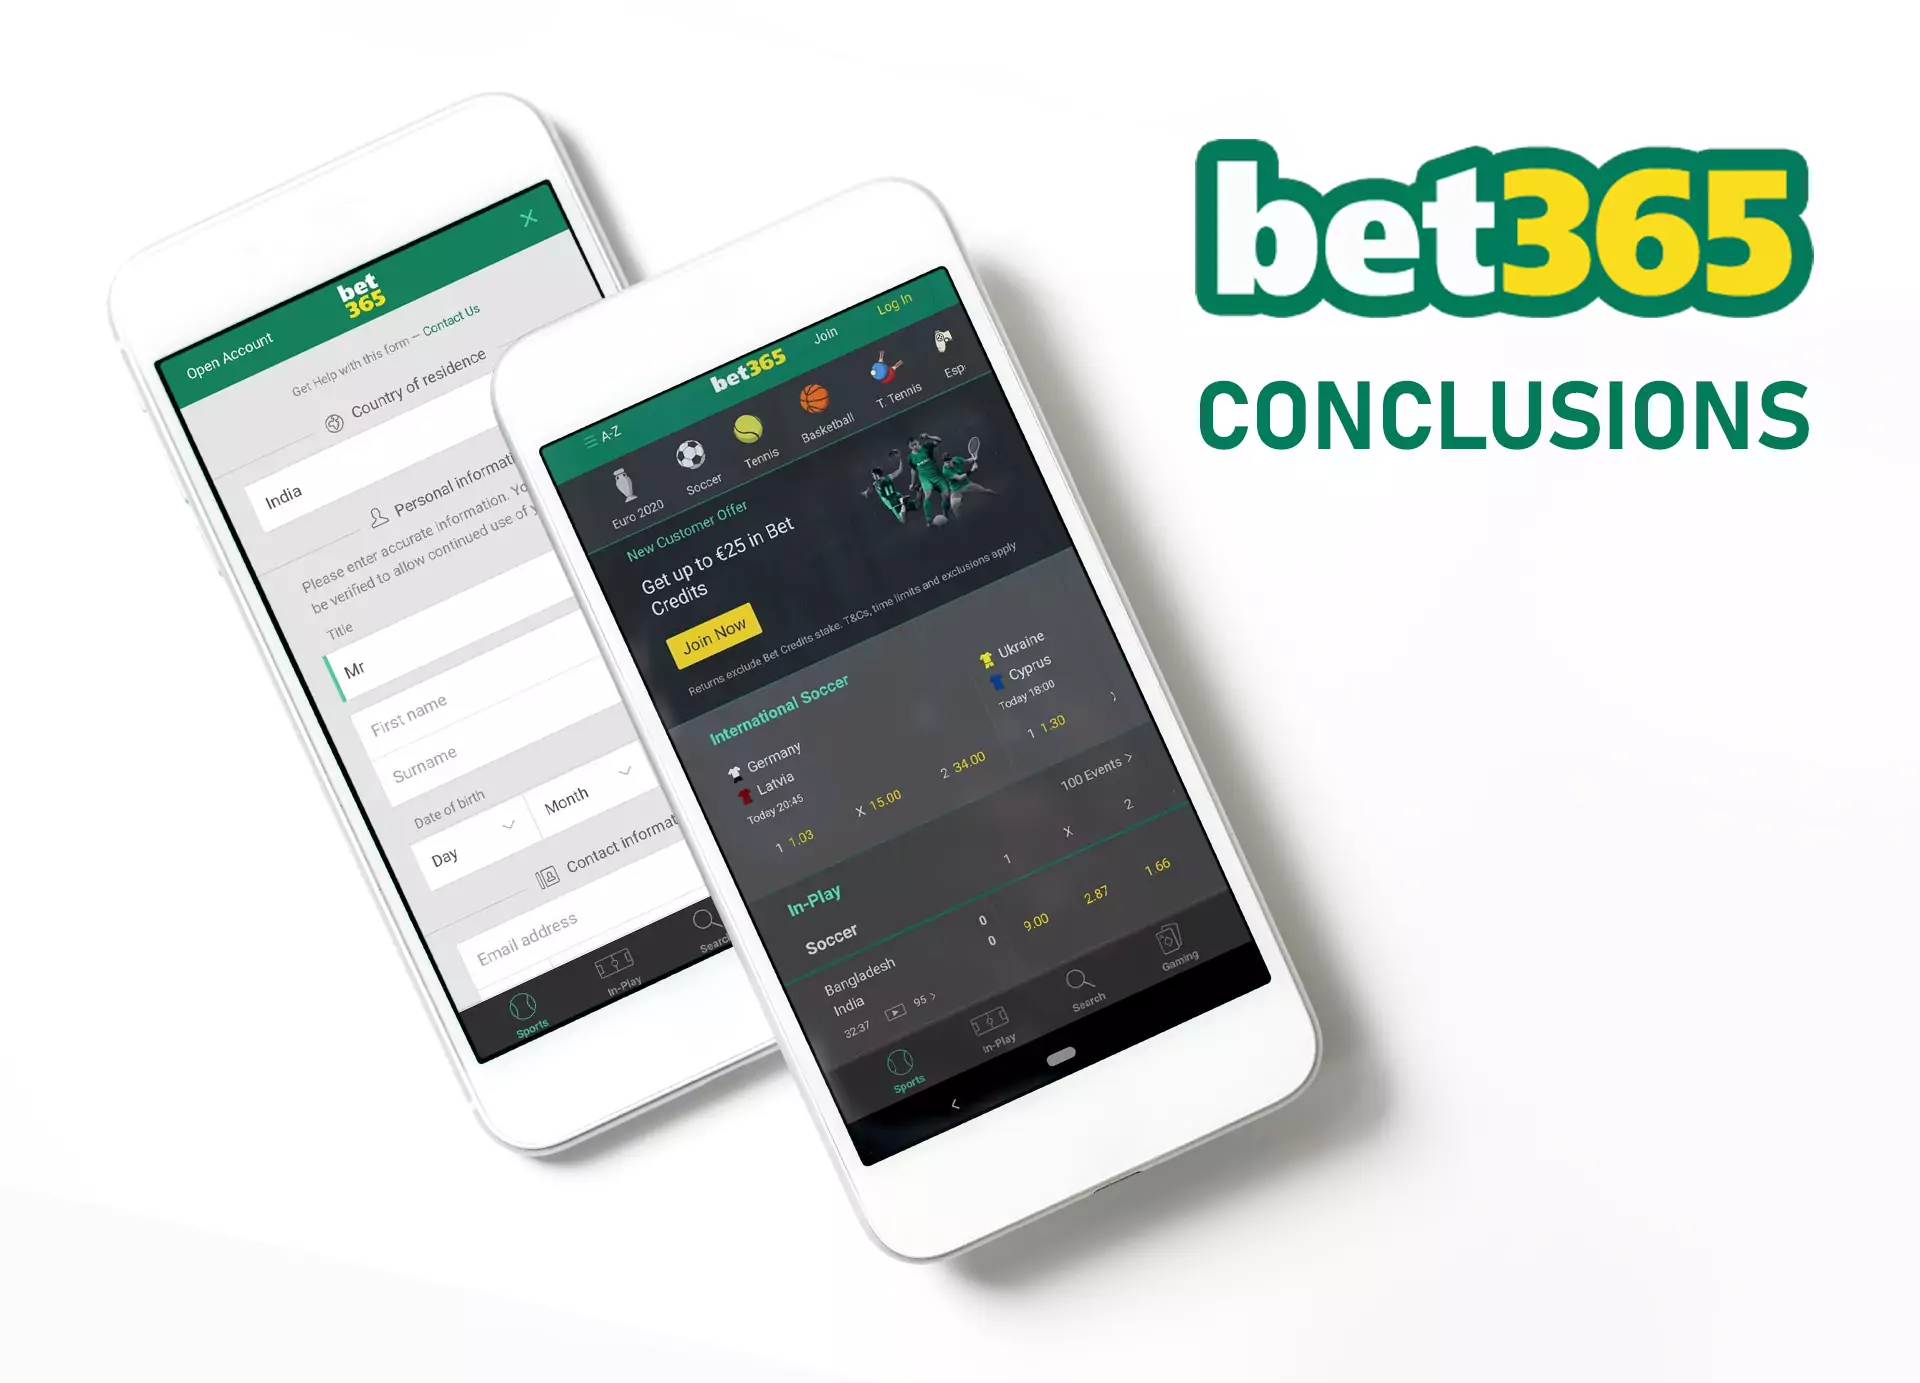 Read the conclusions about the quality of the Bet365 app for Android and iOS.